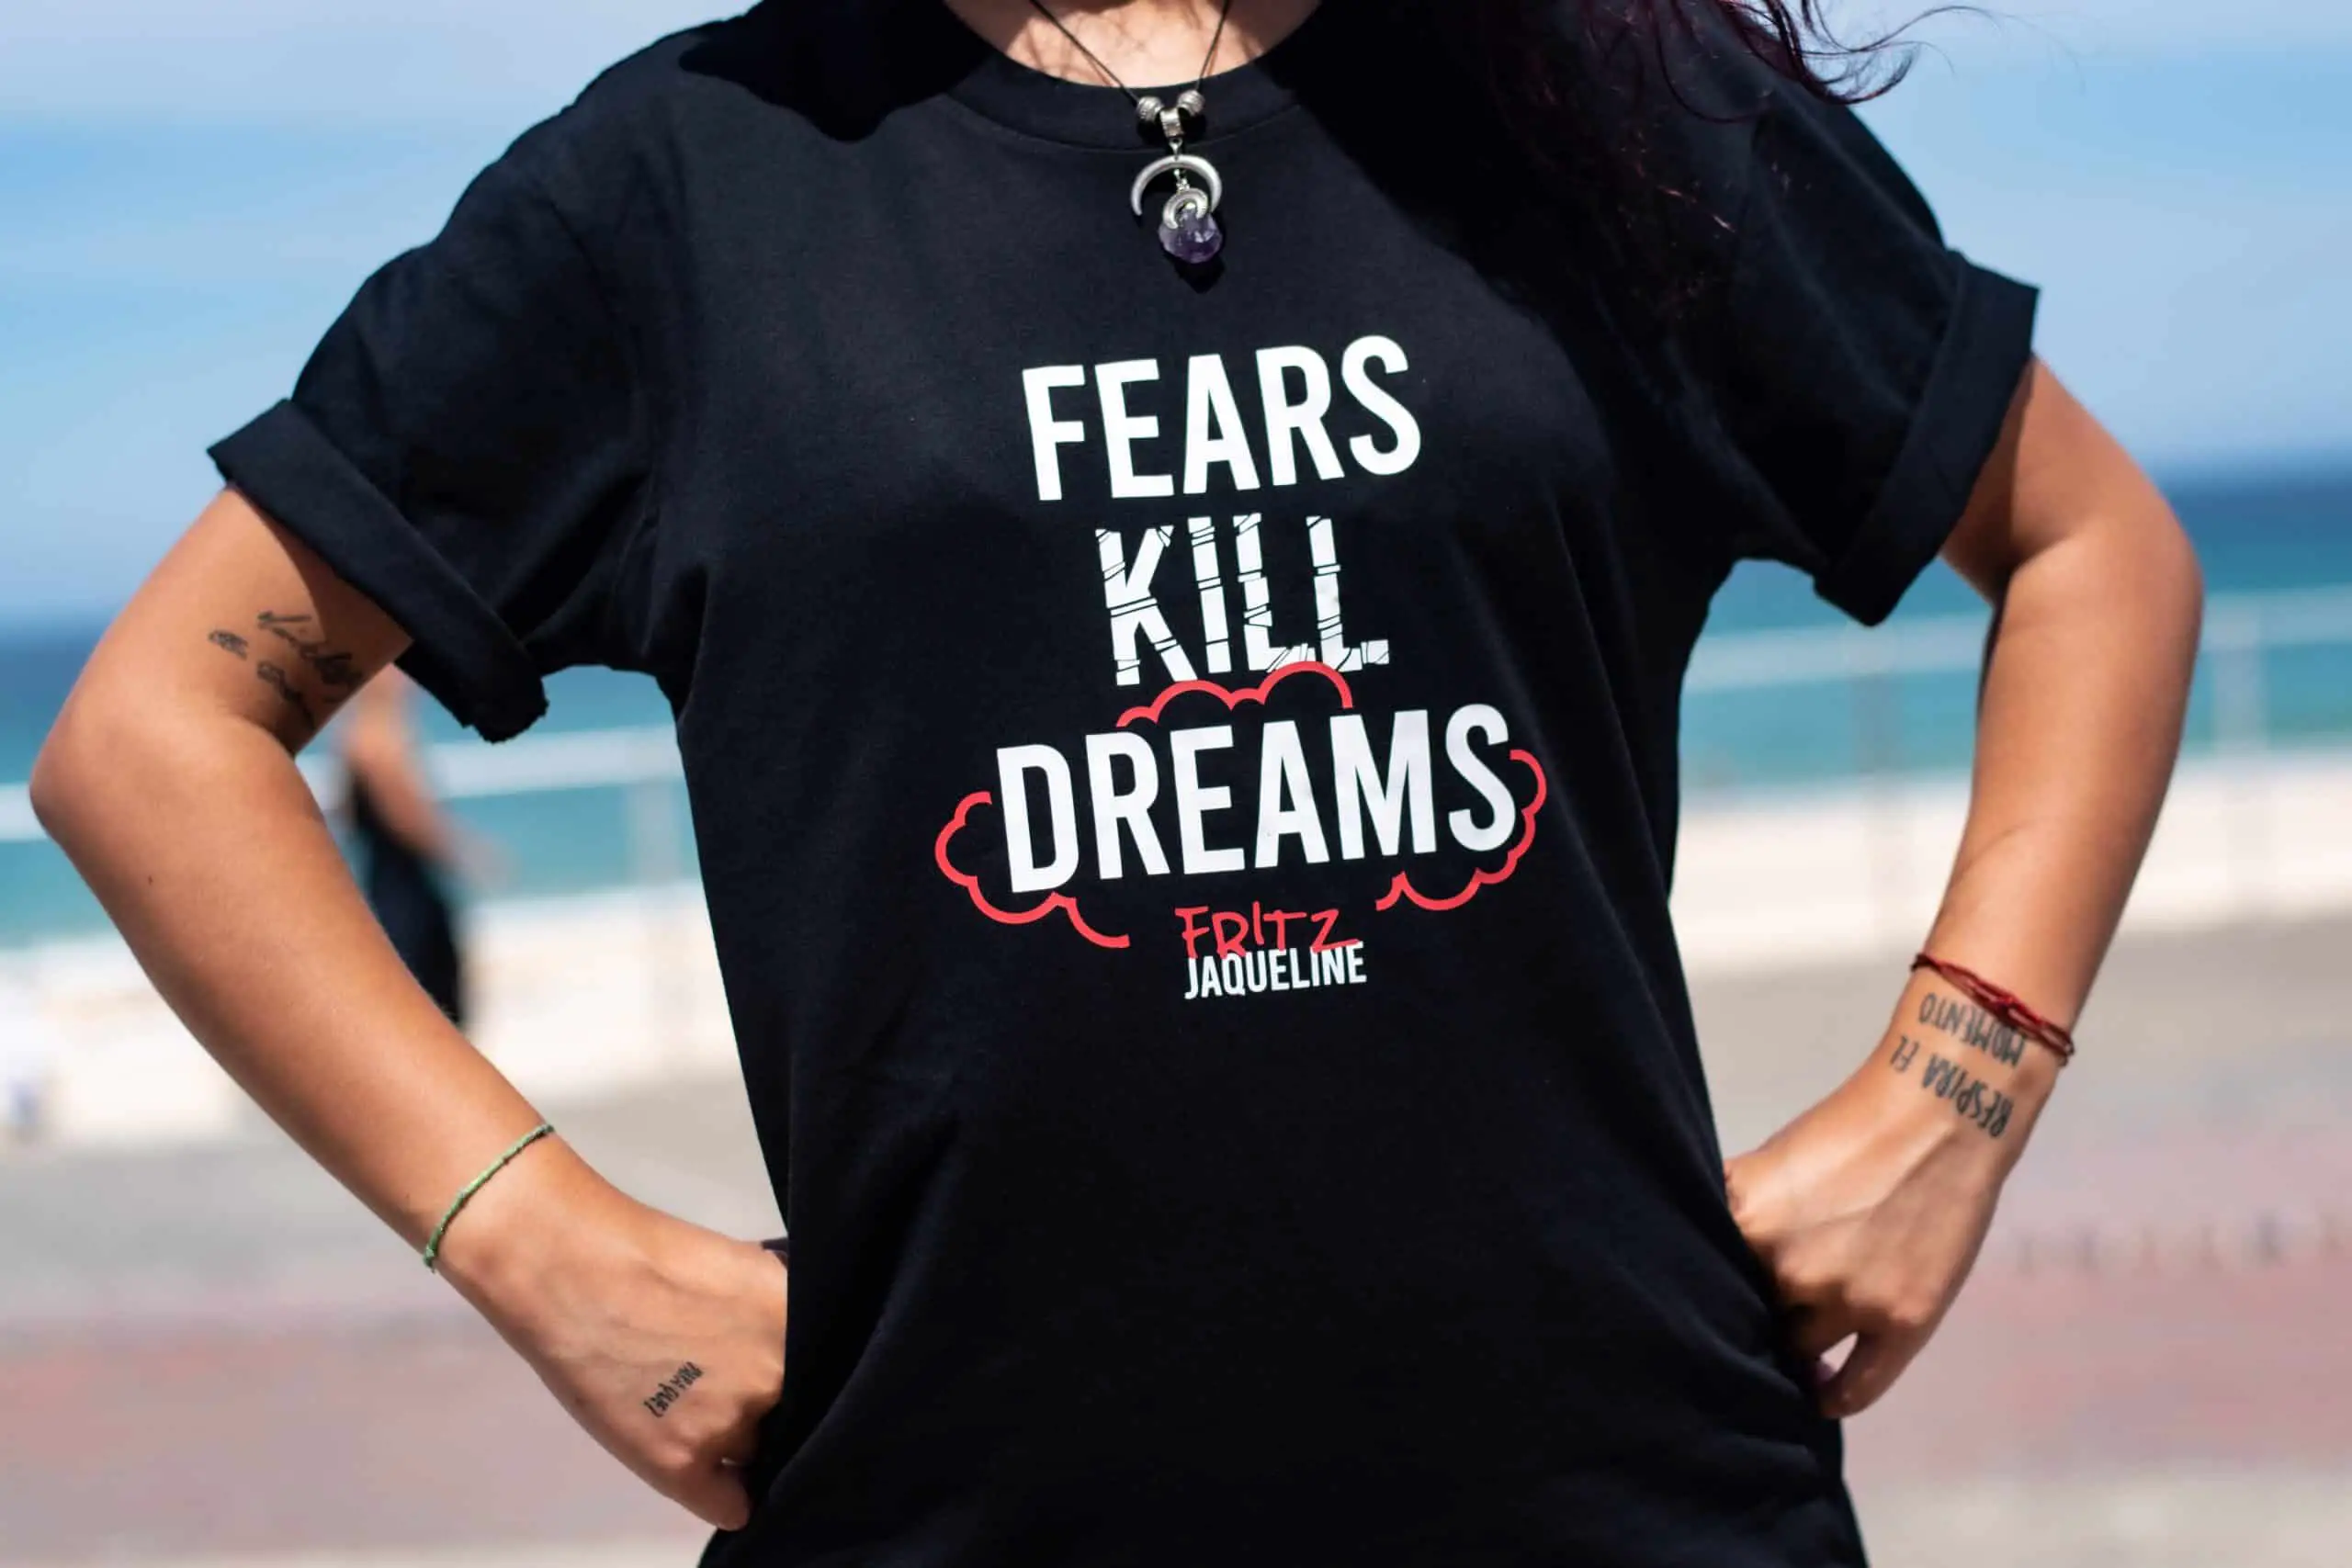 Woman in a shirt that says Fears kill dreams - Overcoming fear